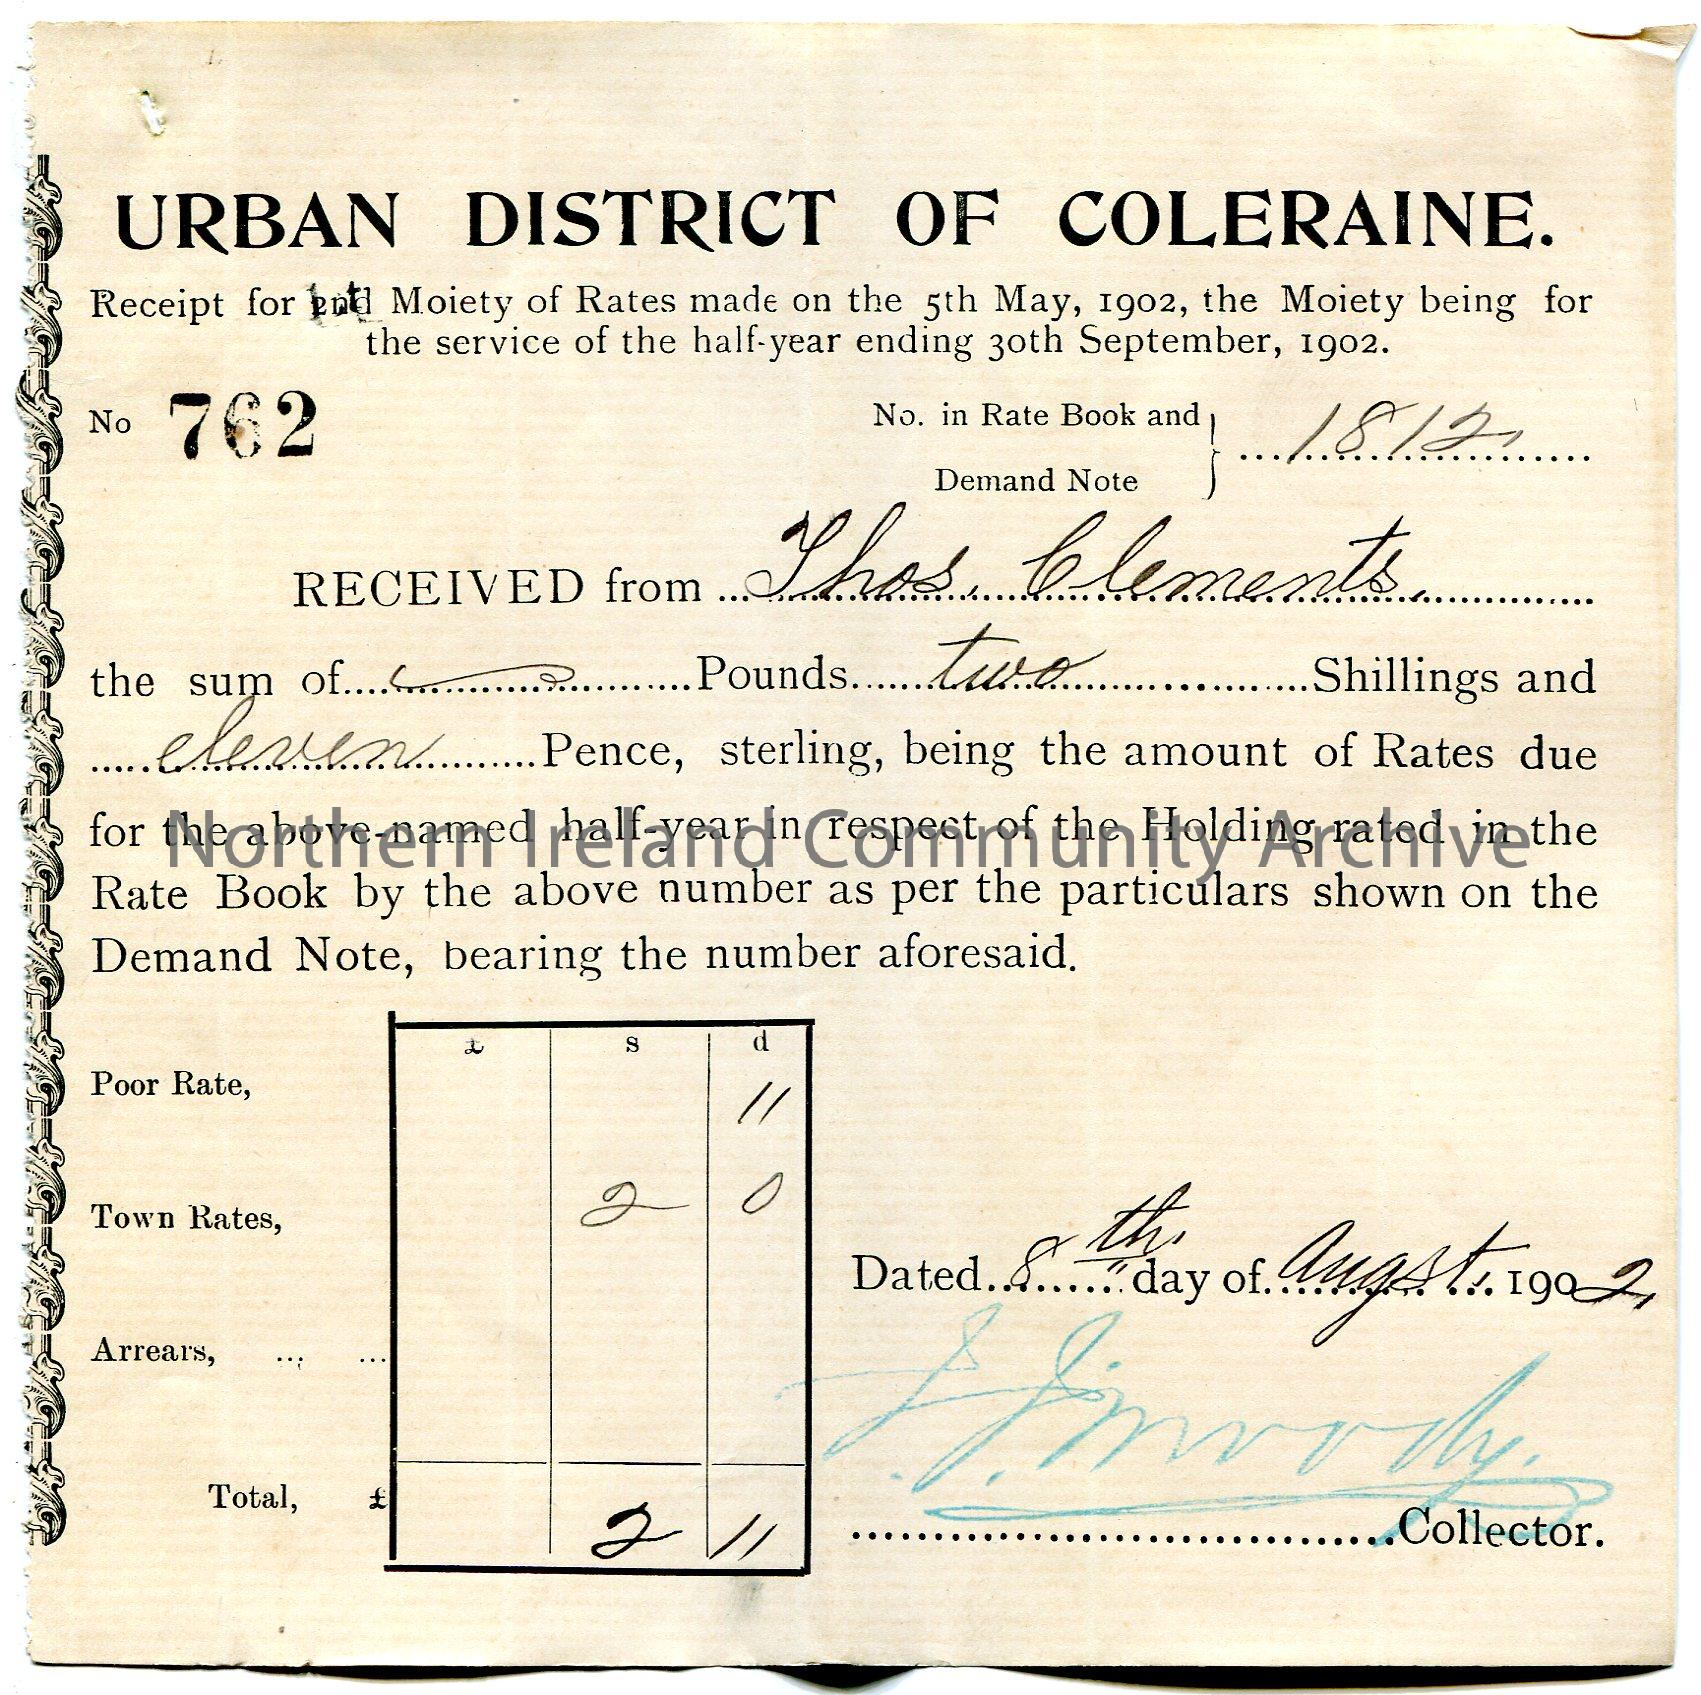 Printed and handwritten receipt for half year rates ending 30th September, 1902 for a property. Receipt no. 762. Issued by Urban District of Coleraine…